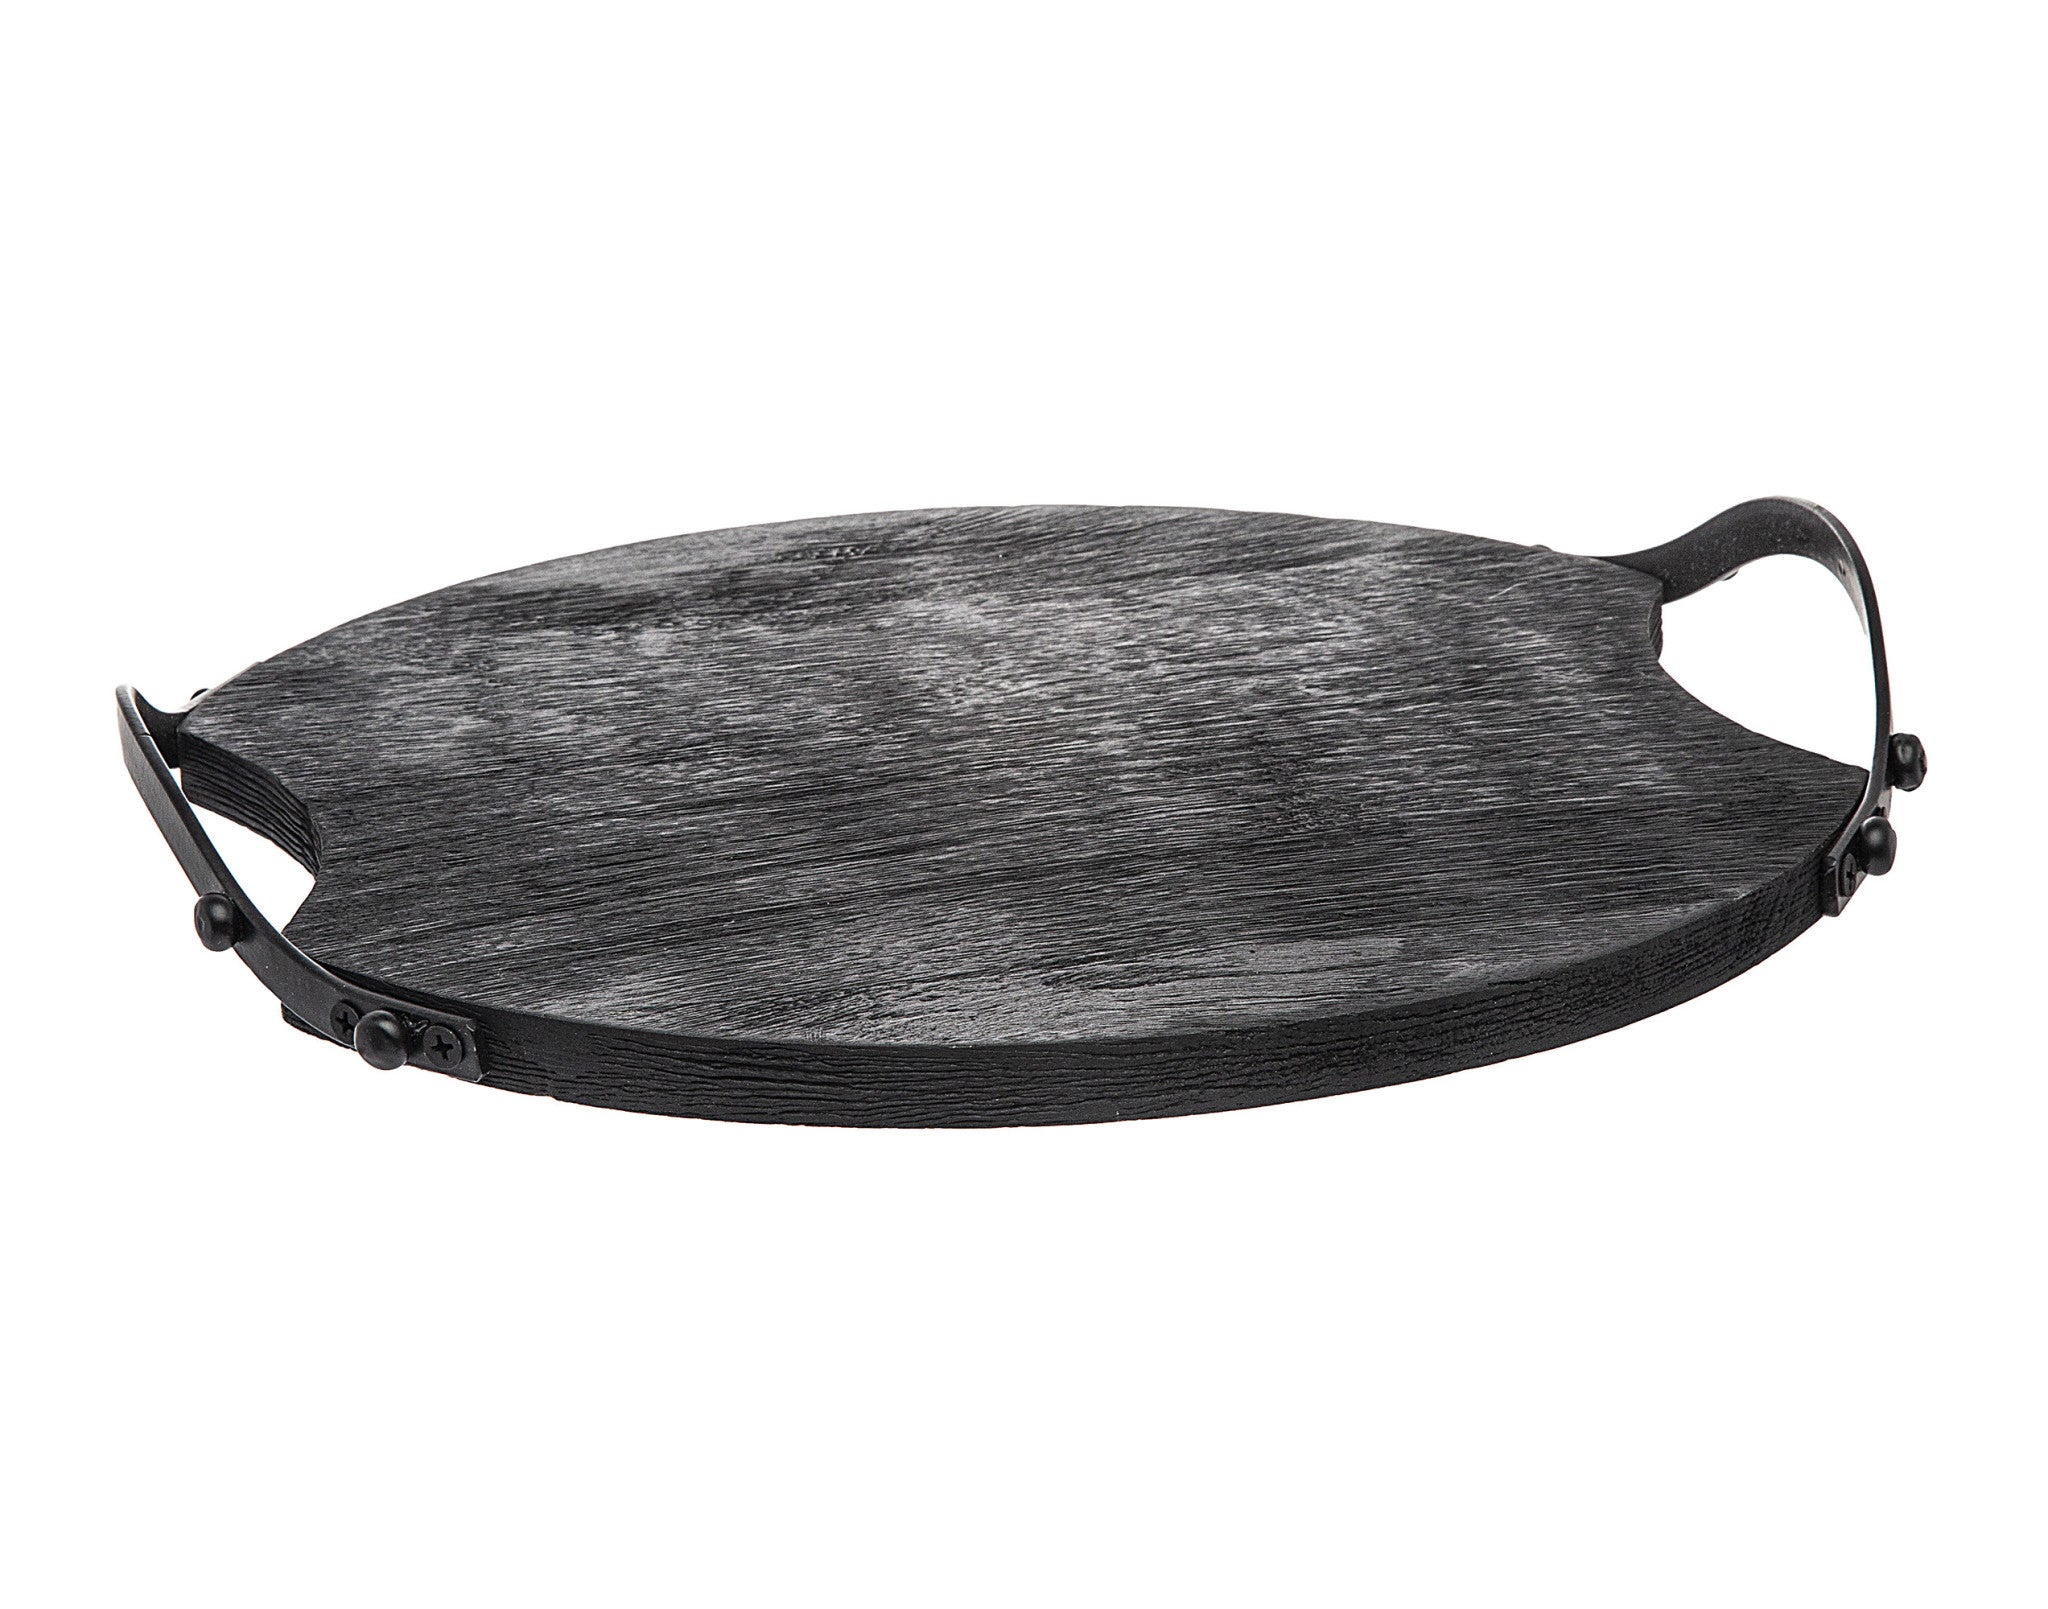 13" Black Round Wood and Metal Serving Tray With Handles